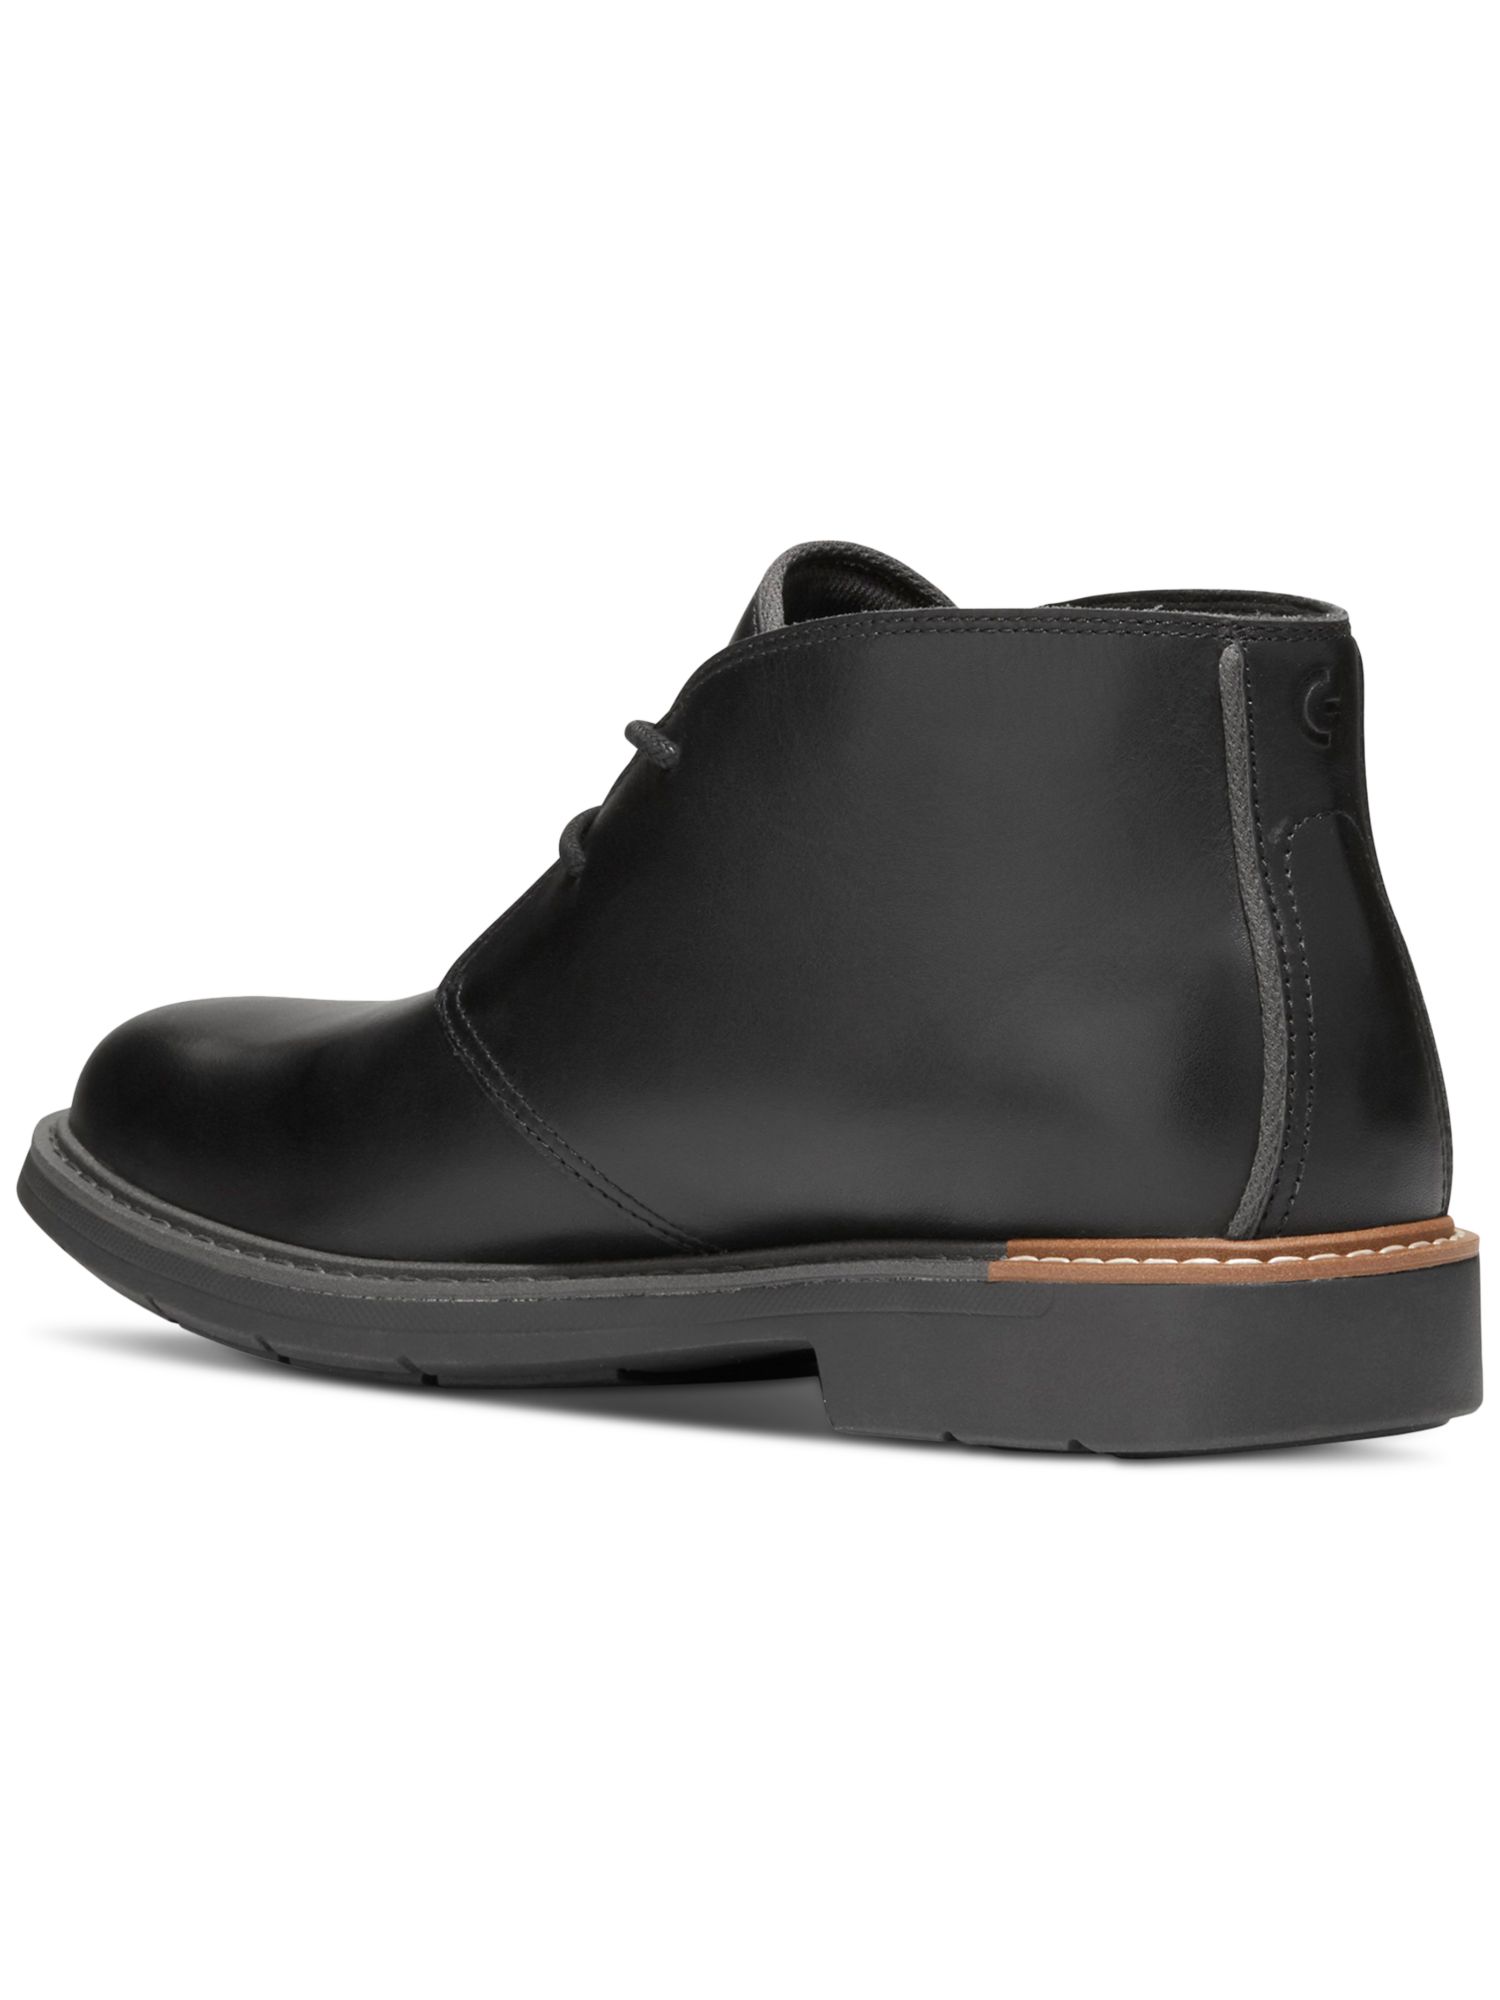 COLE HAAN Mens Black Cushioned Lightweight Go-to Round Toe Block Heel Lace-Up Leather Chukka Boots 10 M